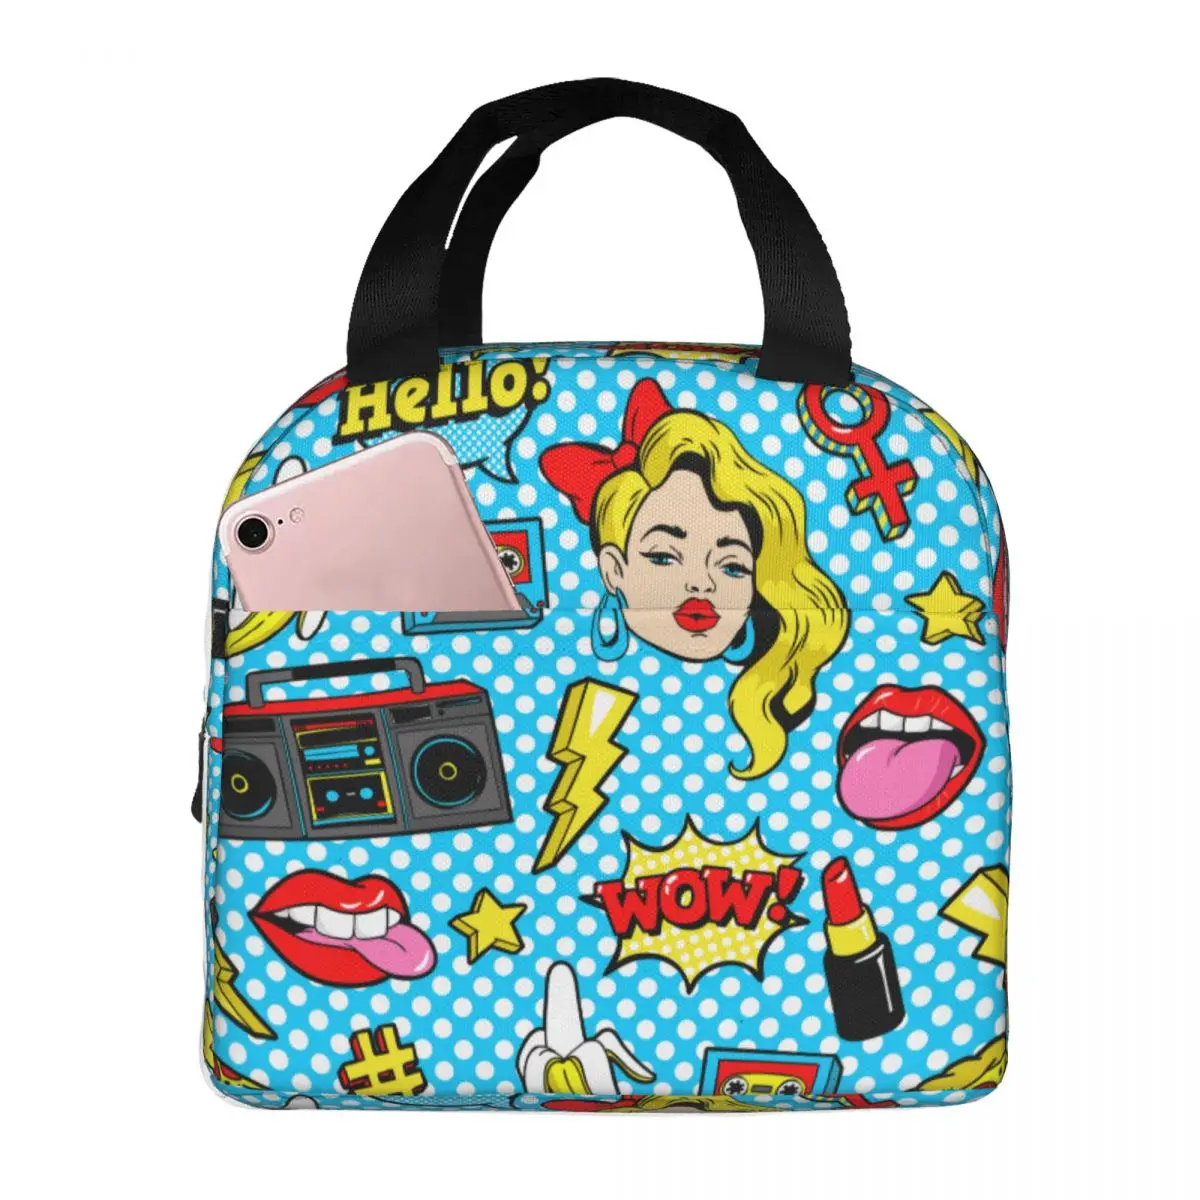 80s 90s Pop Art Comic Style Lunch Bag Portable Insulated Oxford Cooler Thermal School Lunch Box for Women Girl